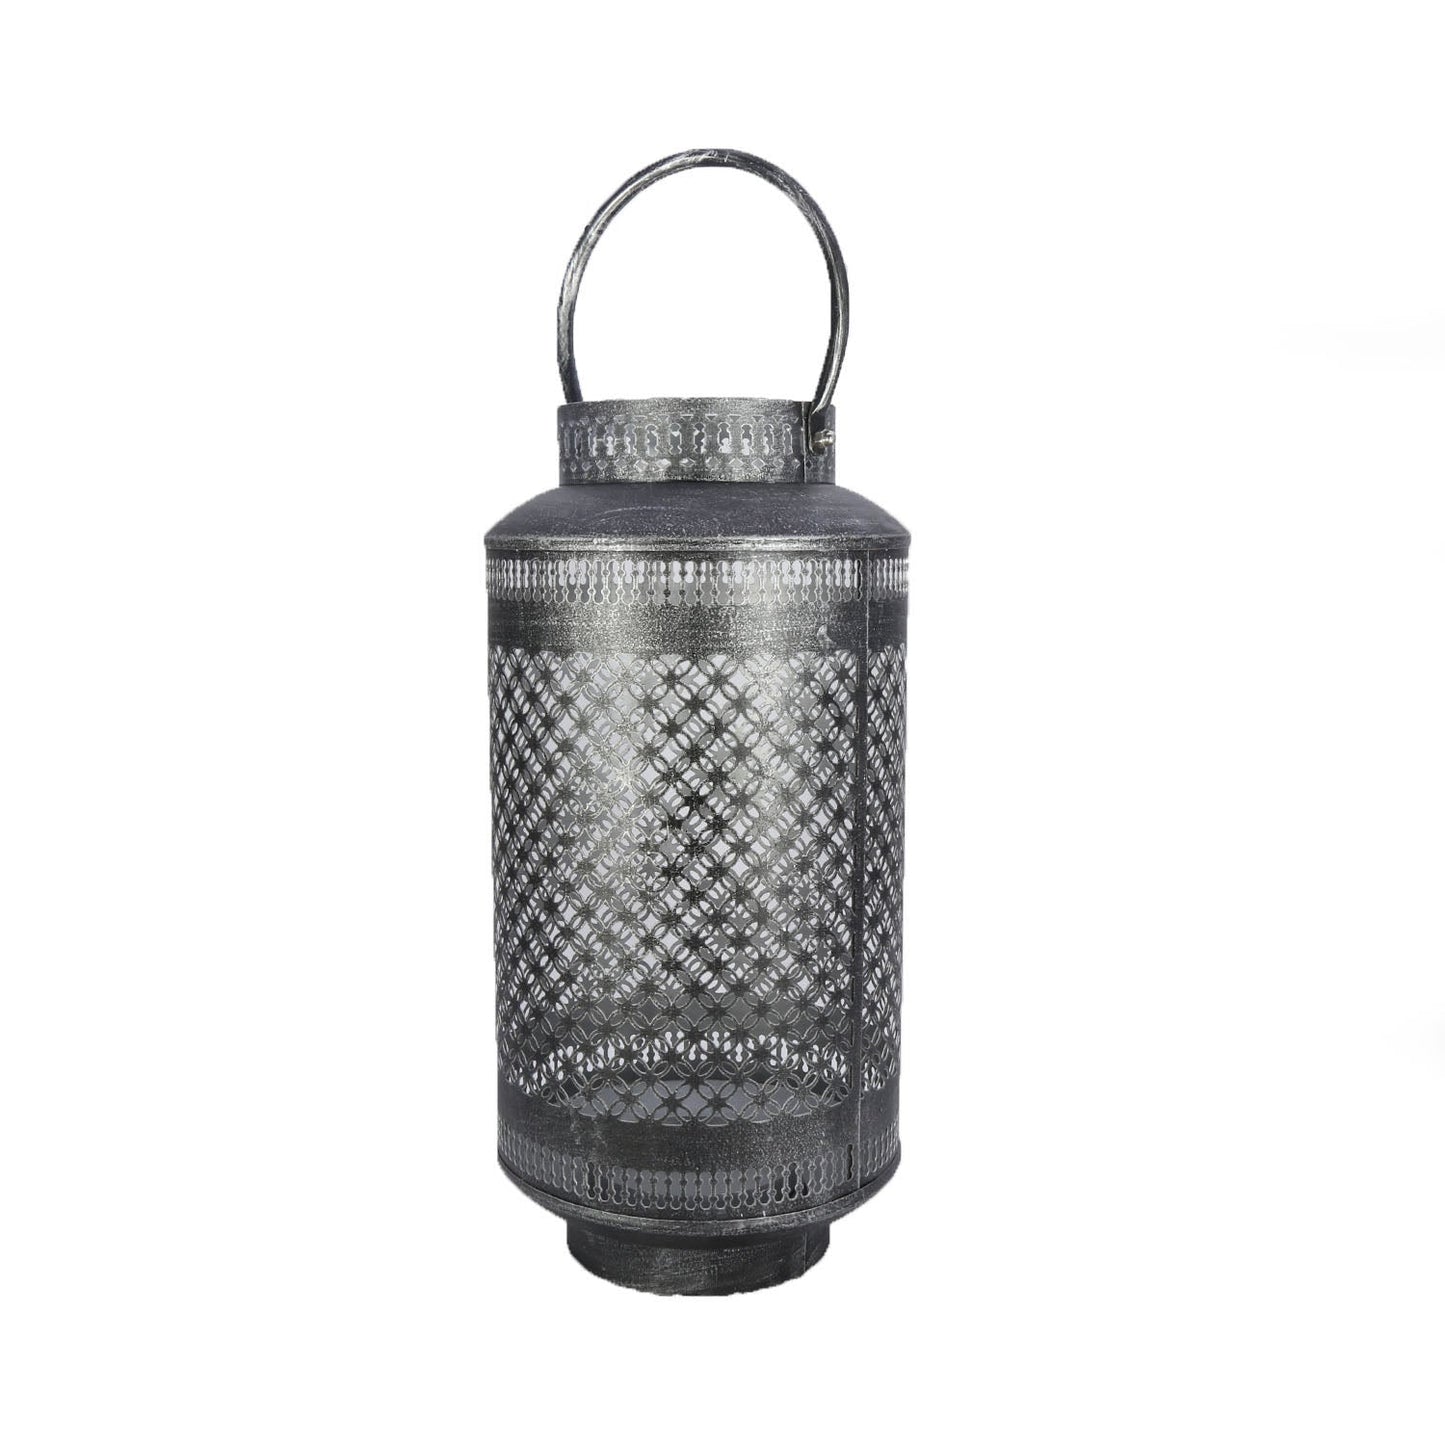 Rustic Silver Finished Moroccan Candle Lantern - Cylindrical Design - Stylla London